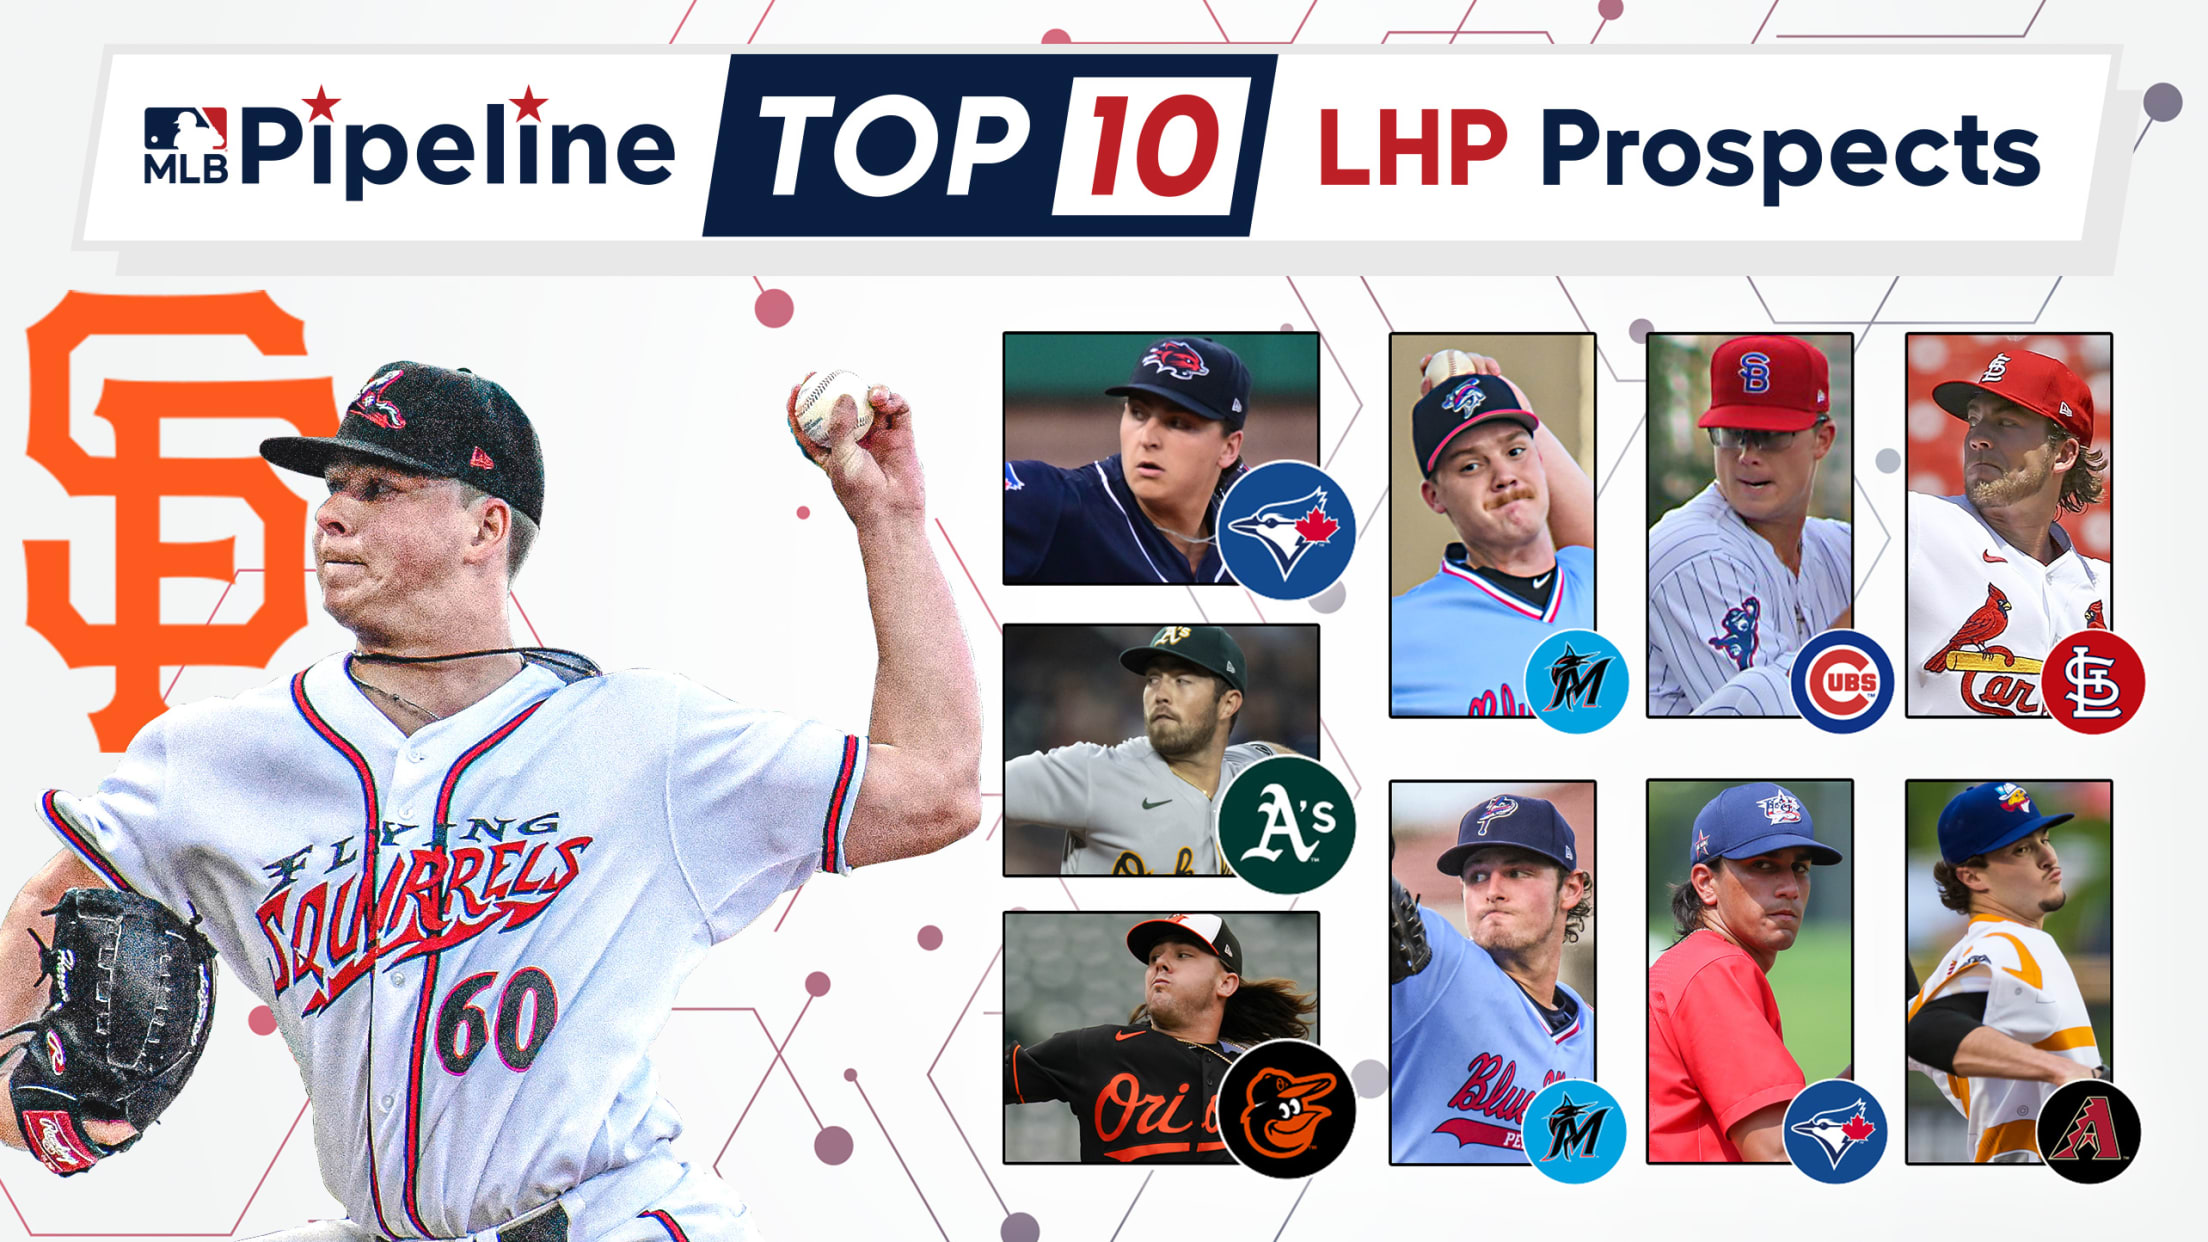 Images of 10 pitching prospects alongside their MLB teams' logos